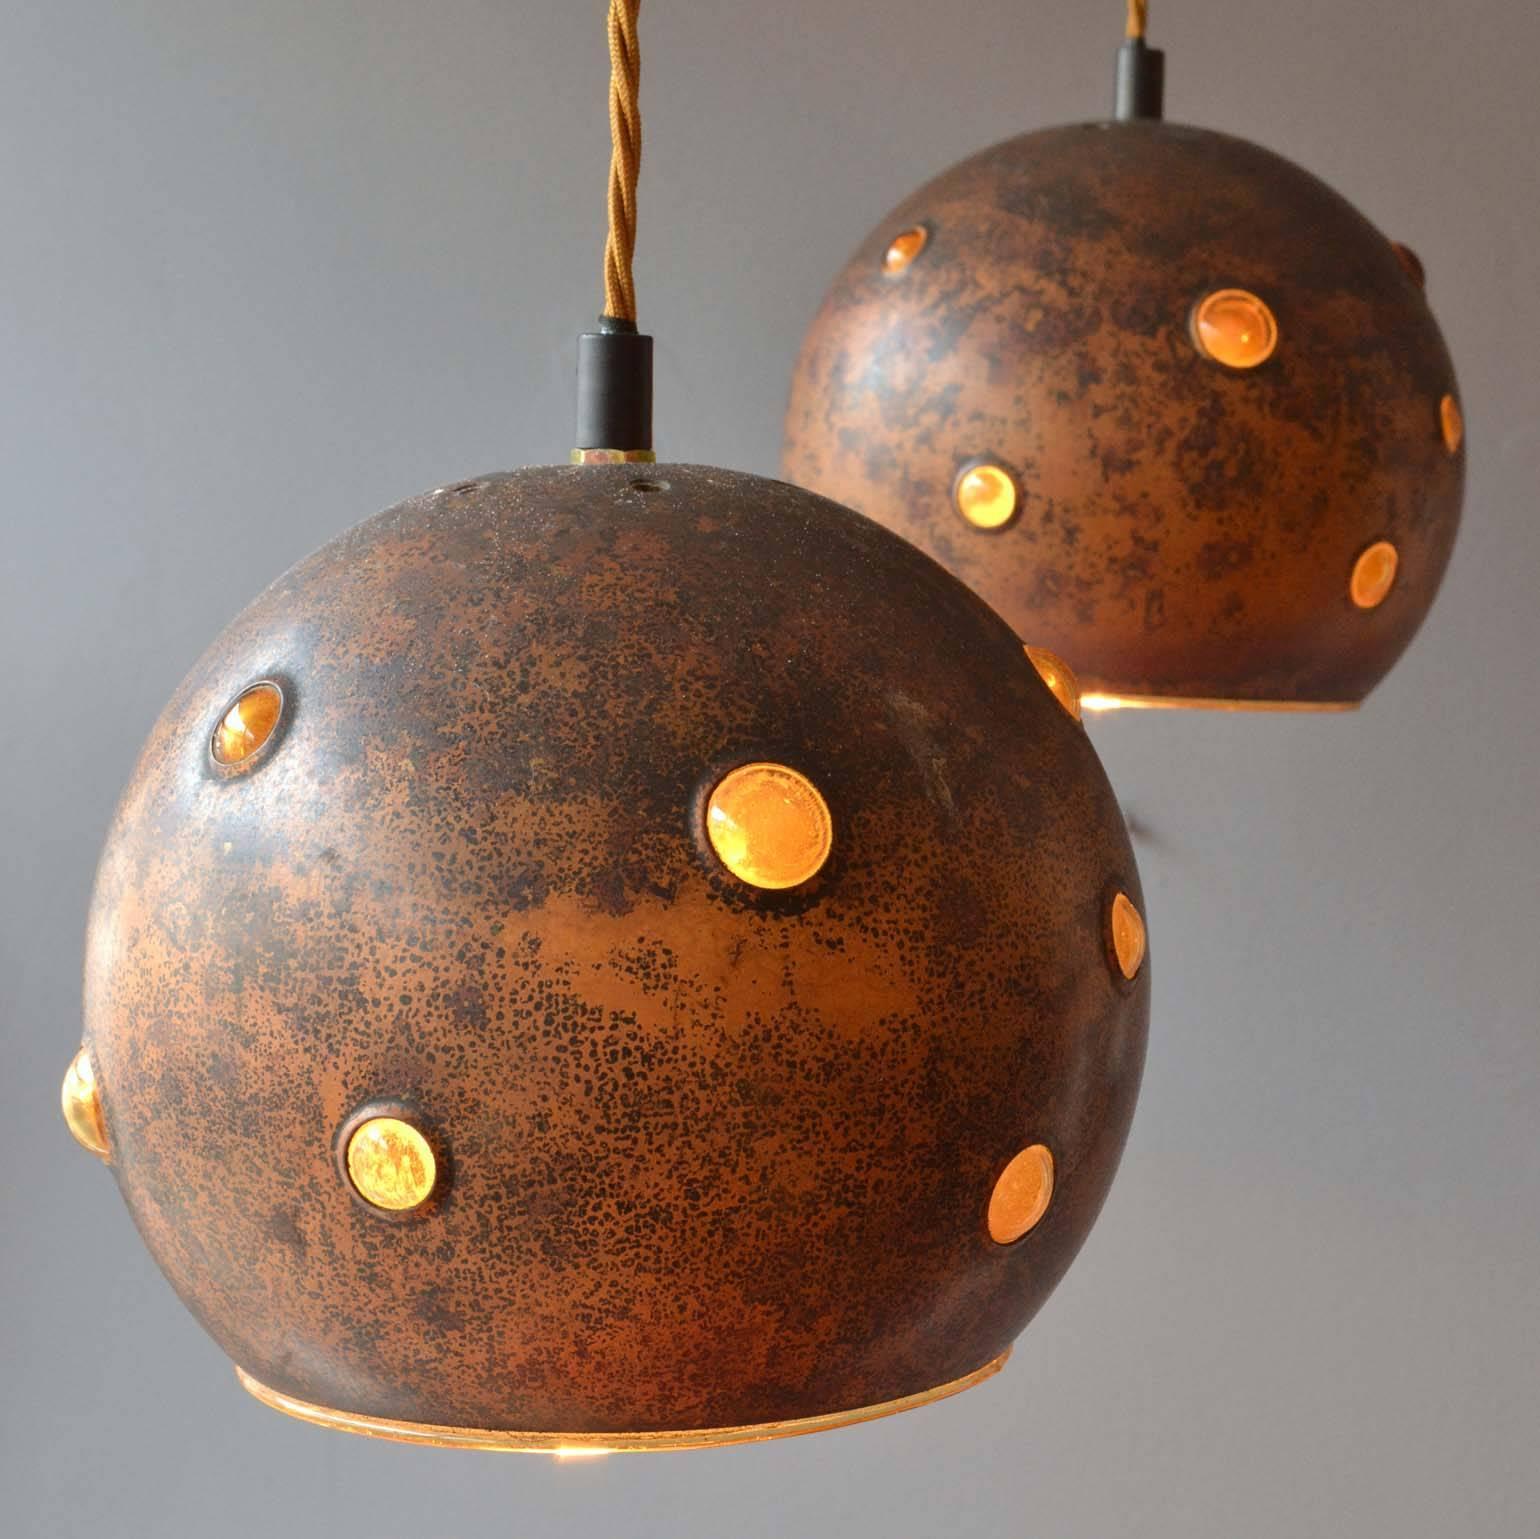 Each of these lamps is unique in its execution. Yellow glass creates bubbles by being blown into an oxidised copper spherical shell. The lamps can be adjusted to alternating heights. They are rewired with antique gold braided flex.
Designed by the